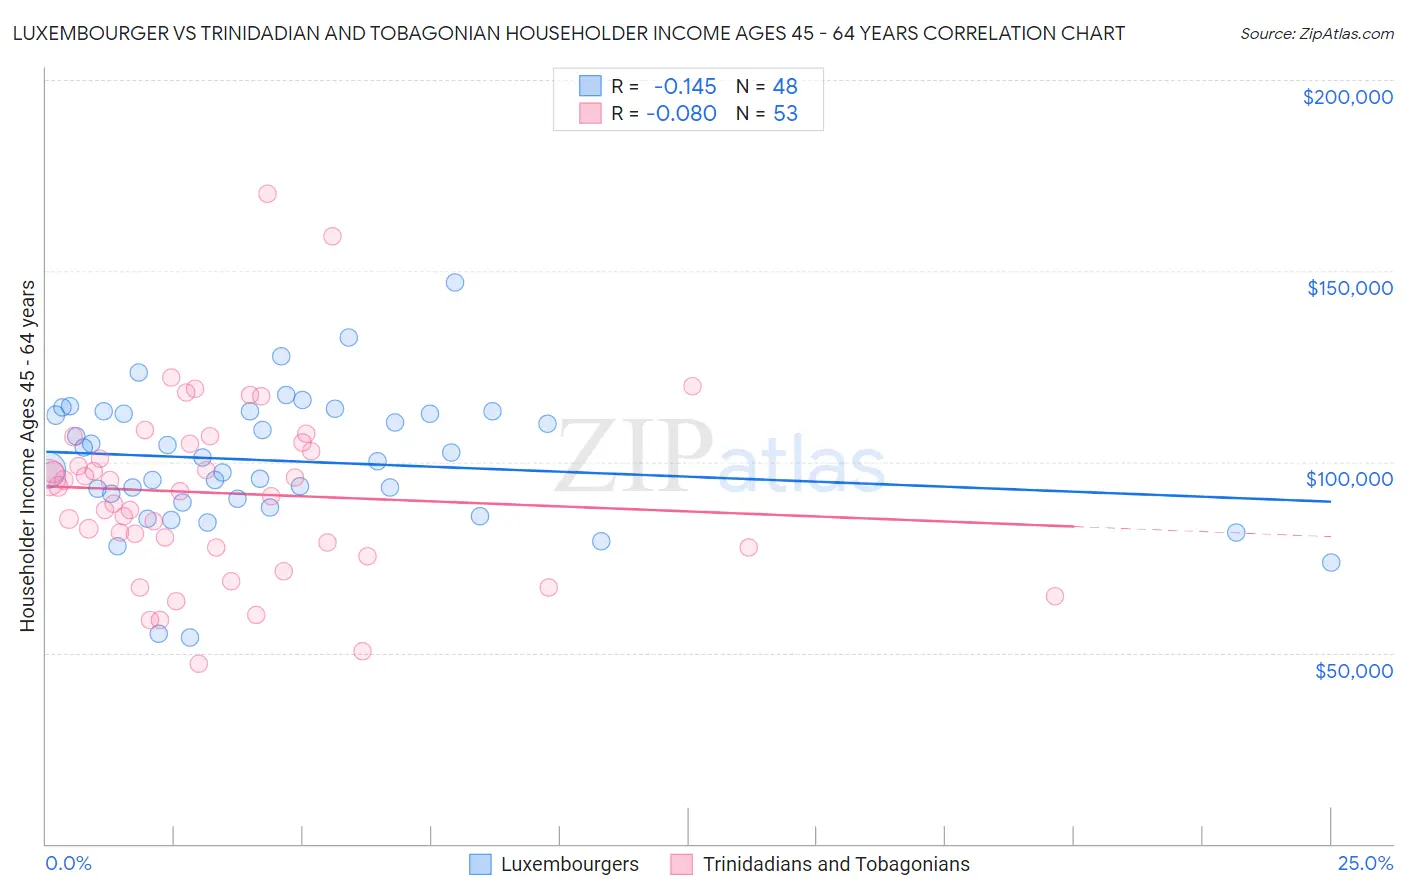 Luxembourger vs Trinidadian and Tobagonian Householder Income Ages 45 - 64 years